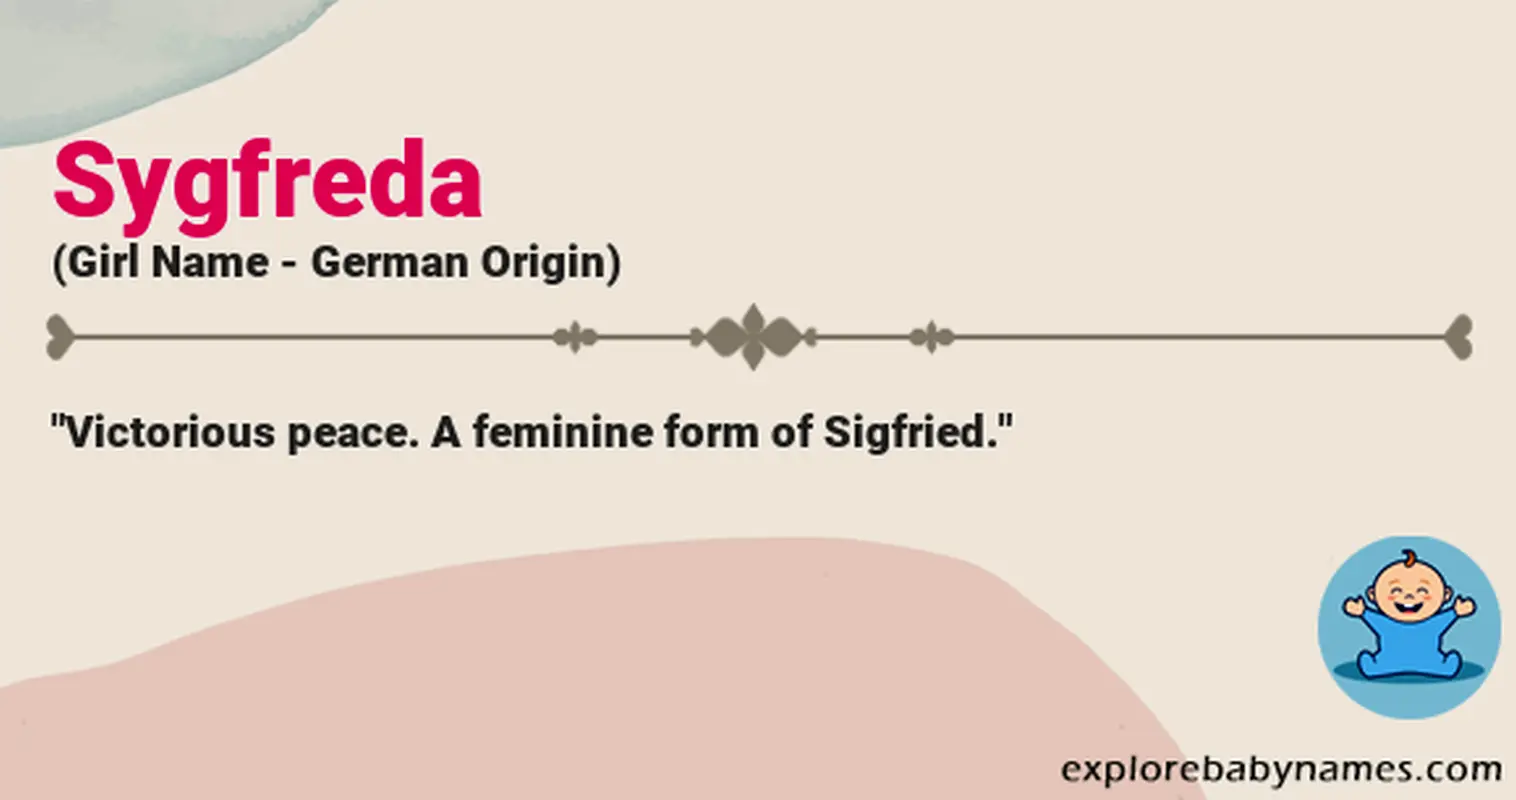 Meaning of Sygfreda